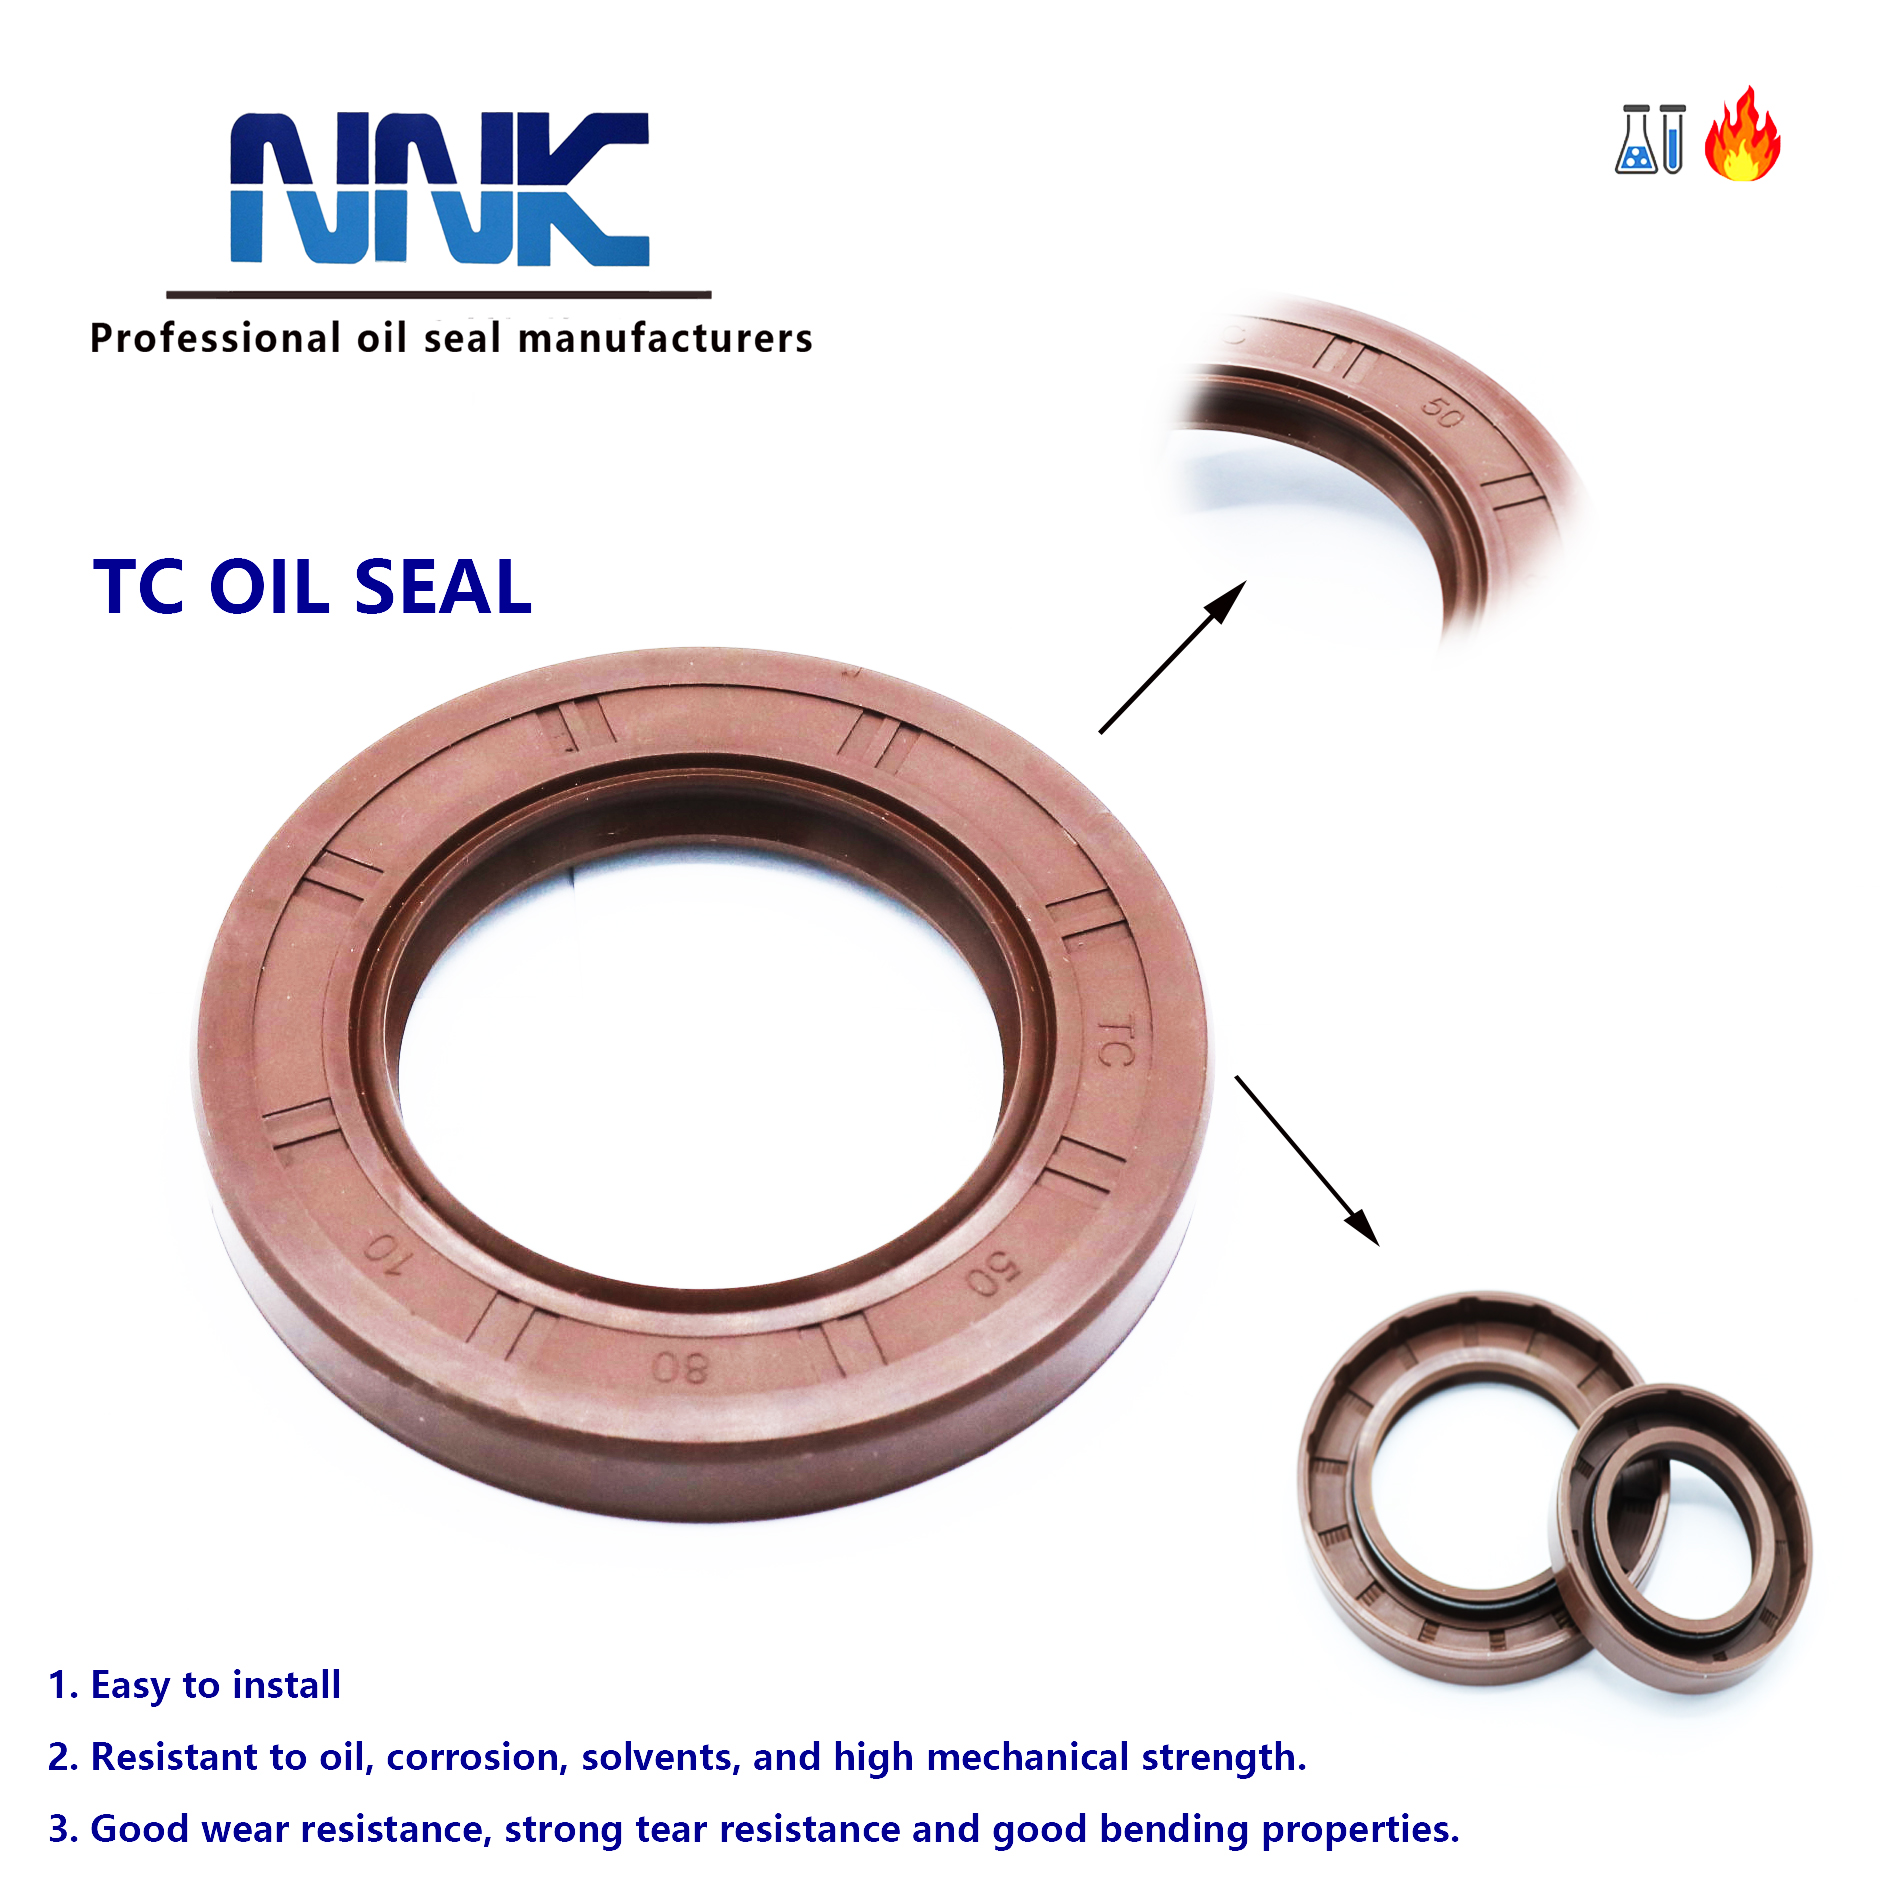 Why do you need to use TC oil seal?